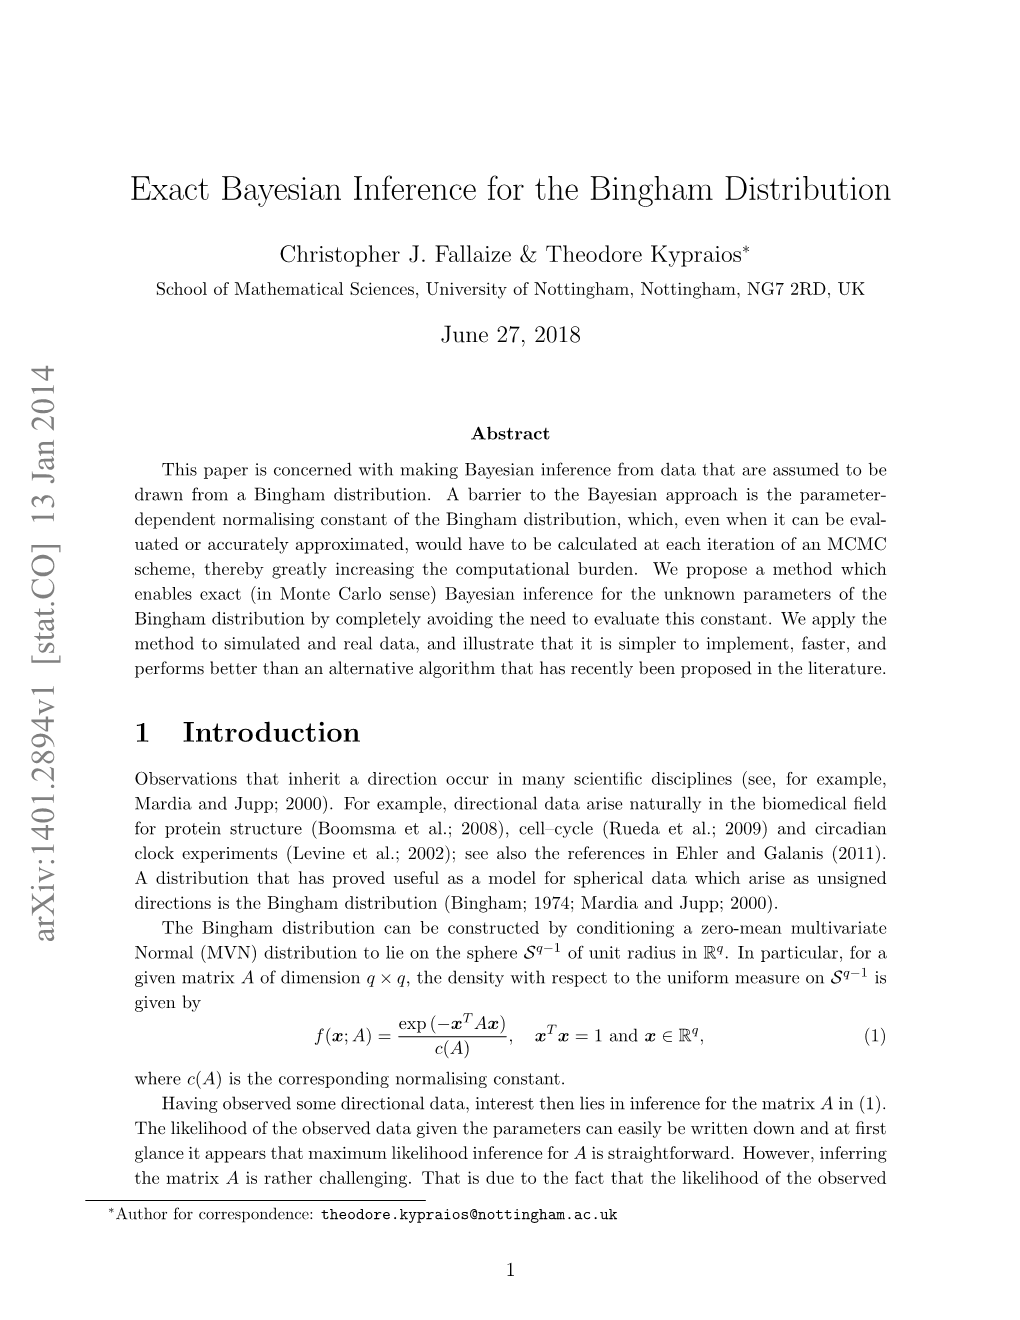 Exact Bayesian Inference for the Bingham Distribution